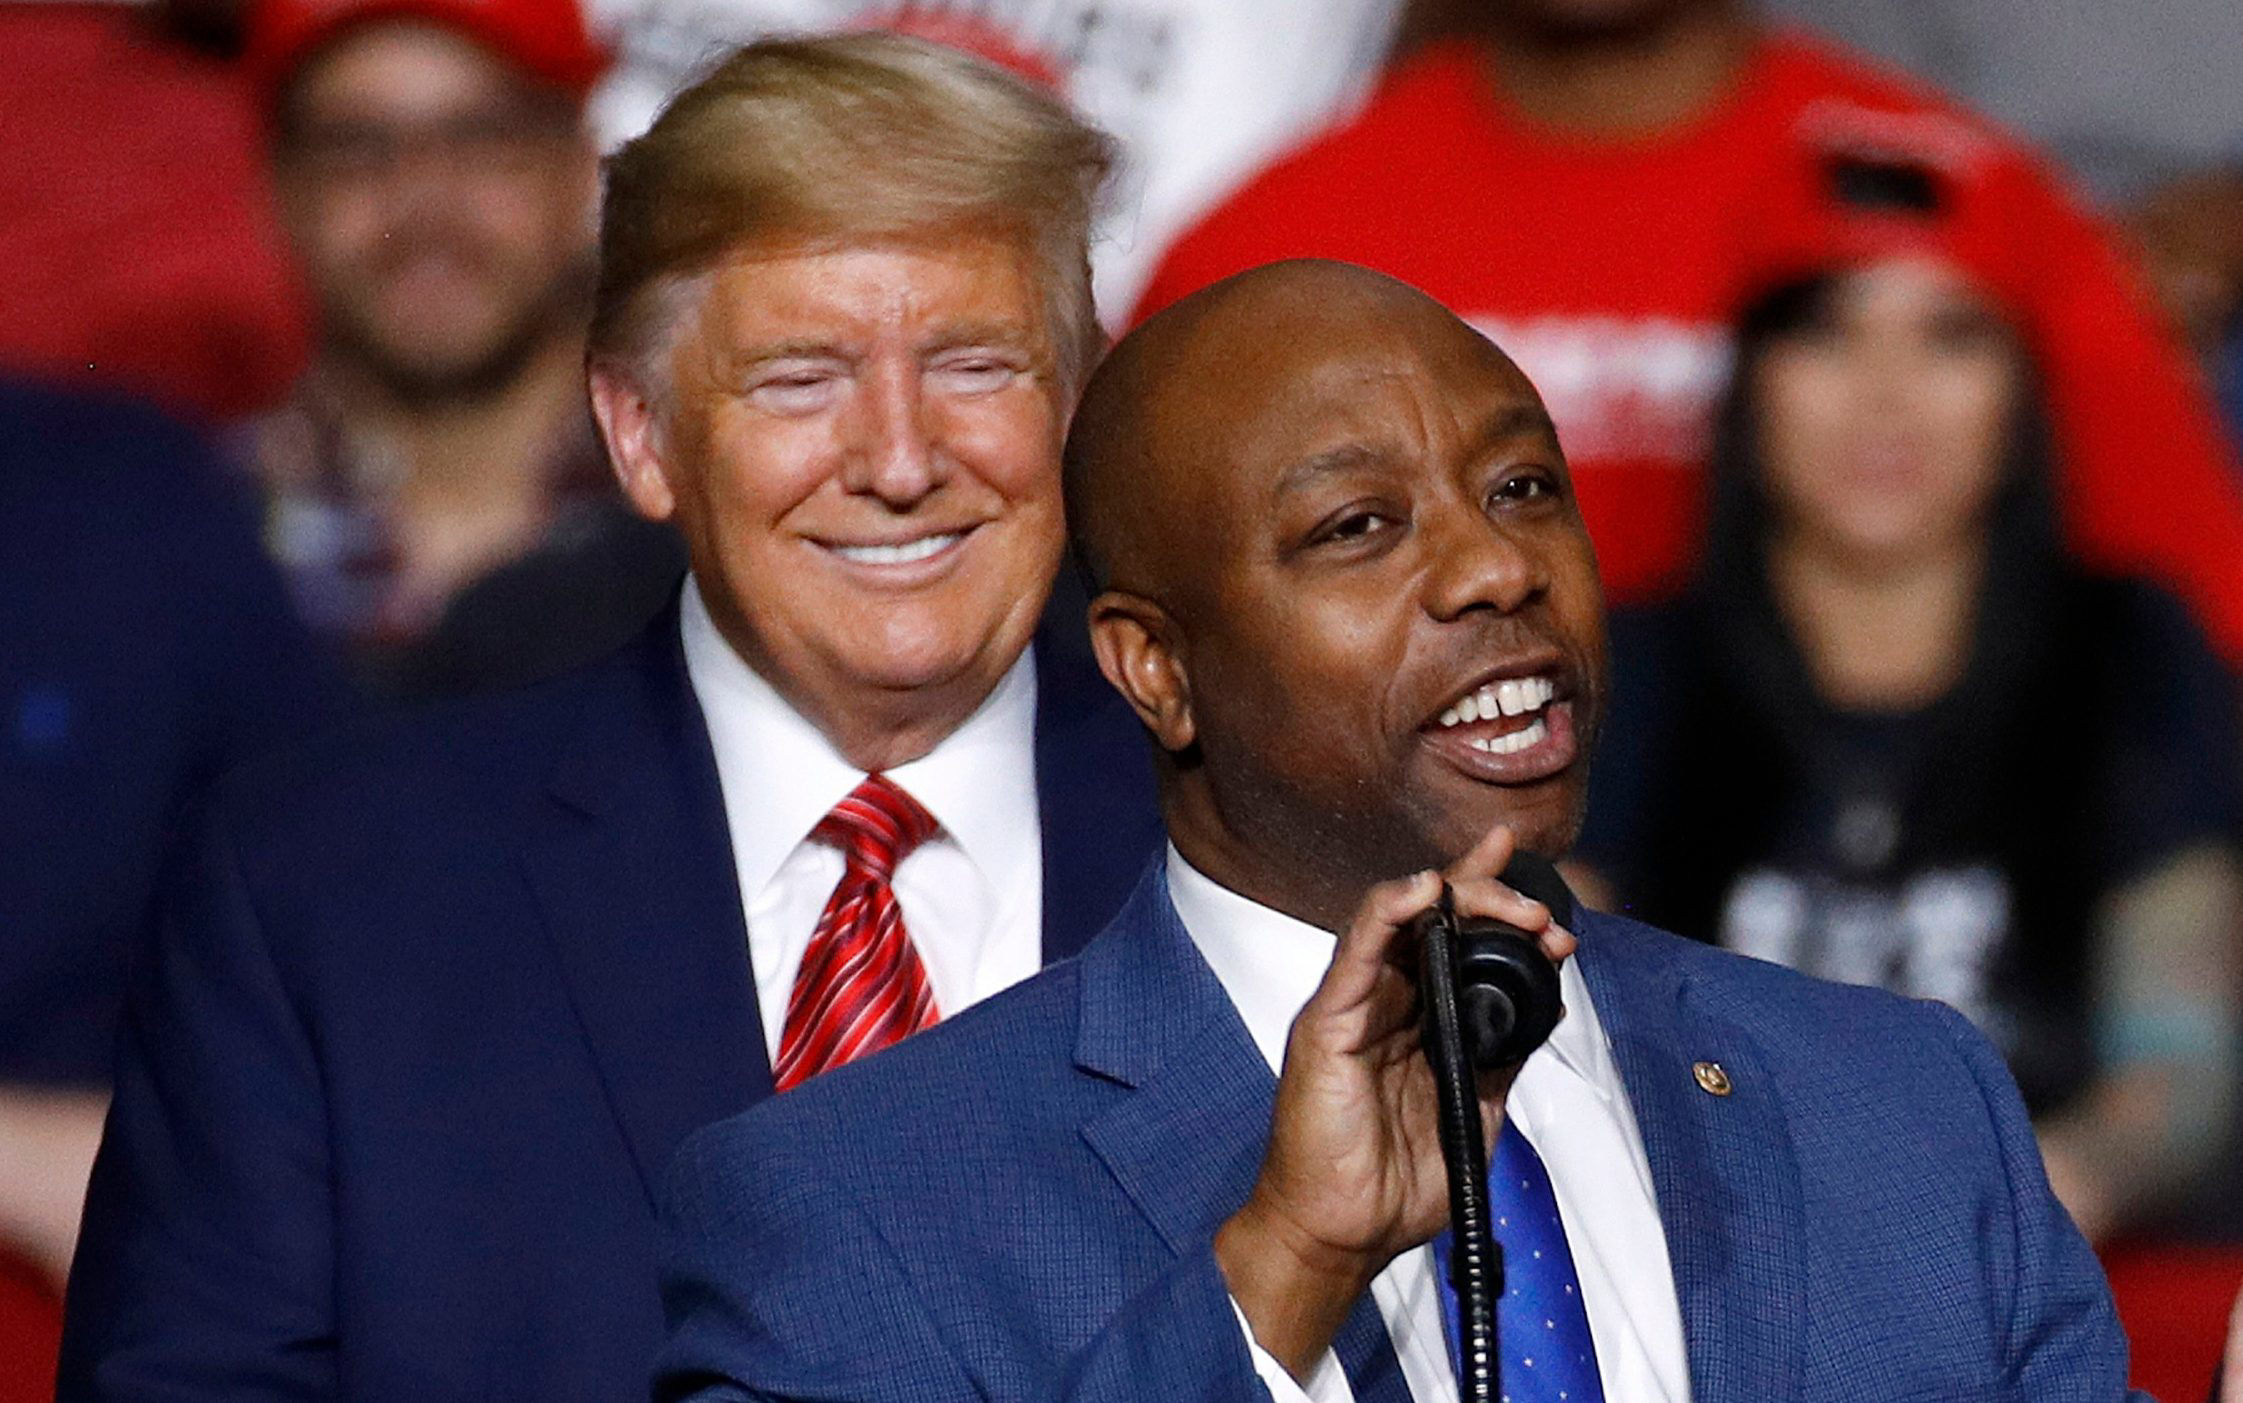 Tim Scott endorses Donald Trump amid speculation he could be running mate